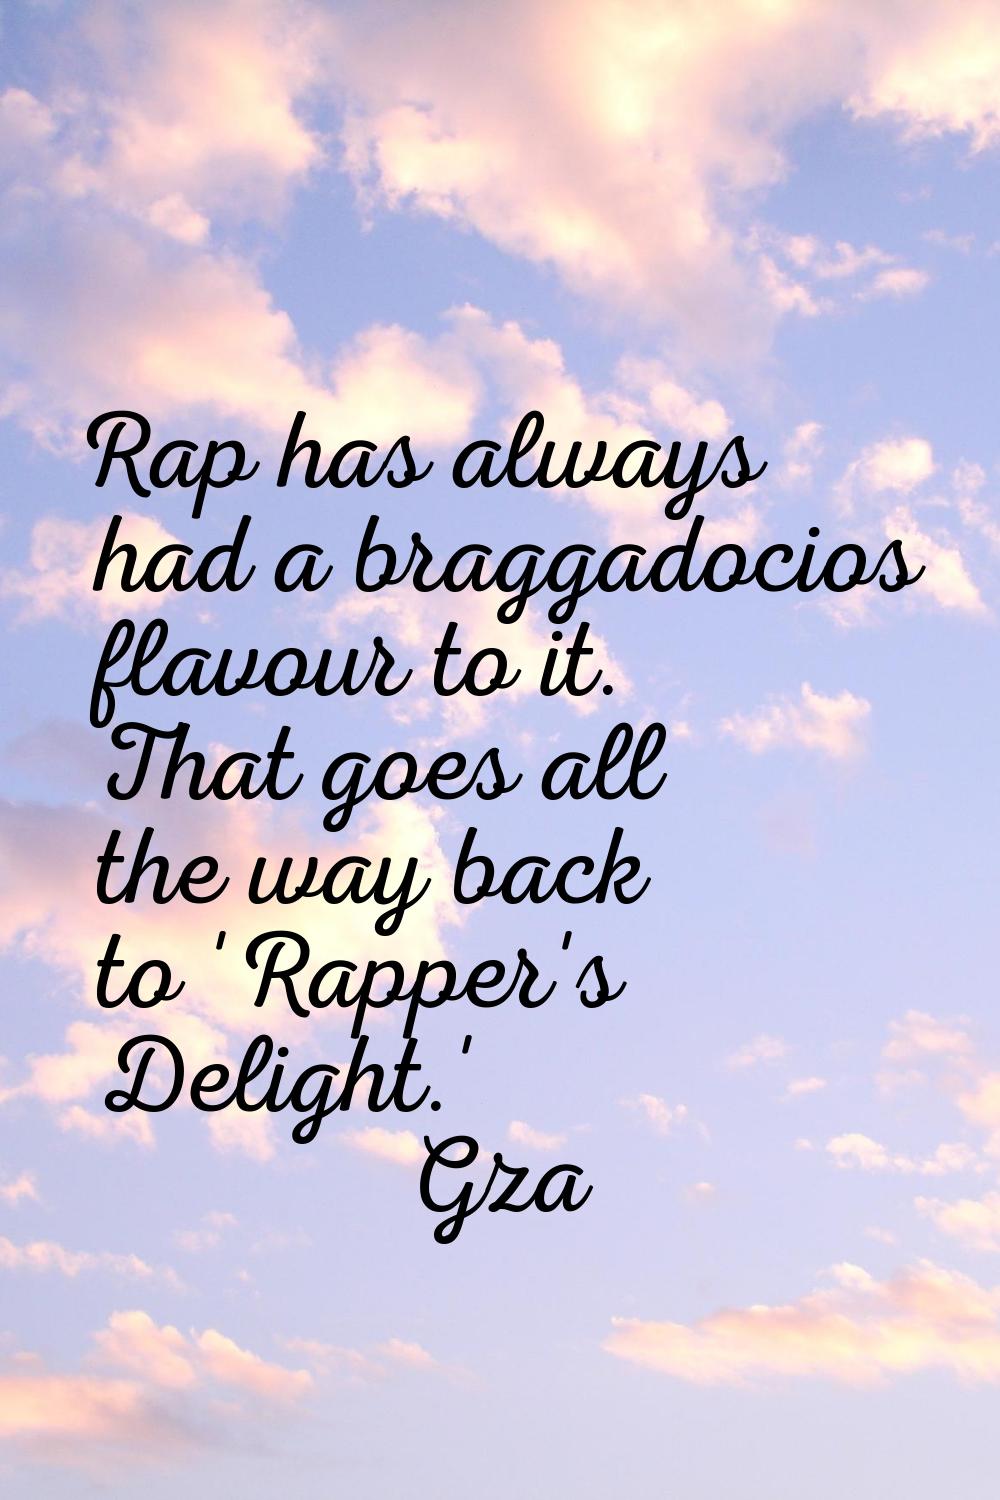 Rap has always had a braggadocios flavour to it. That goes all the way back to 'Rapper's Delight.'